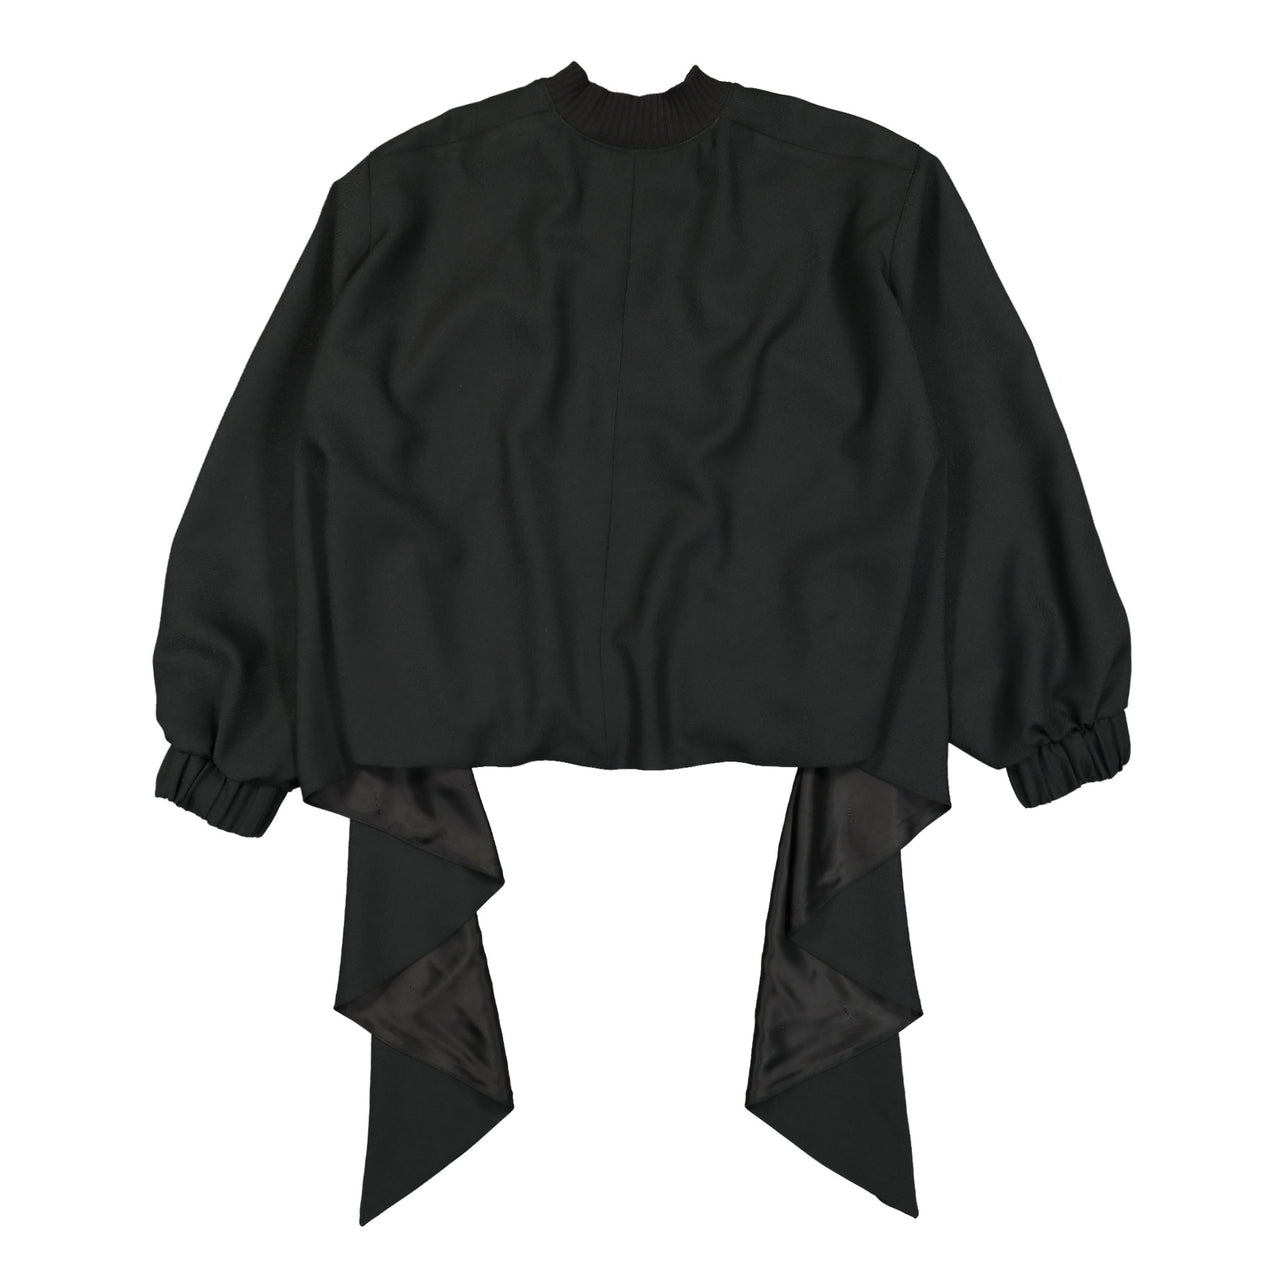 Blouson Jacket With Cape And Bow